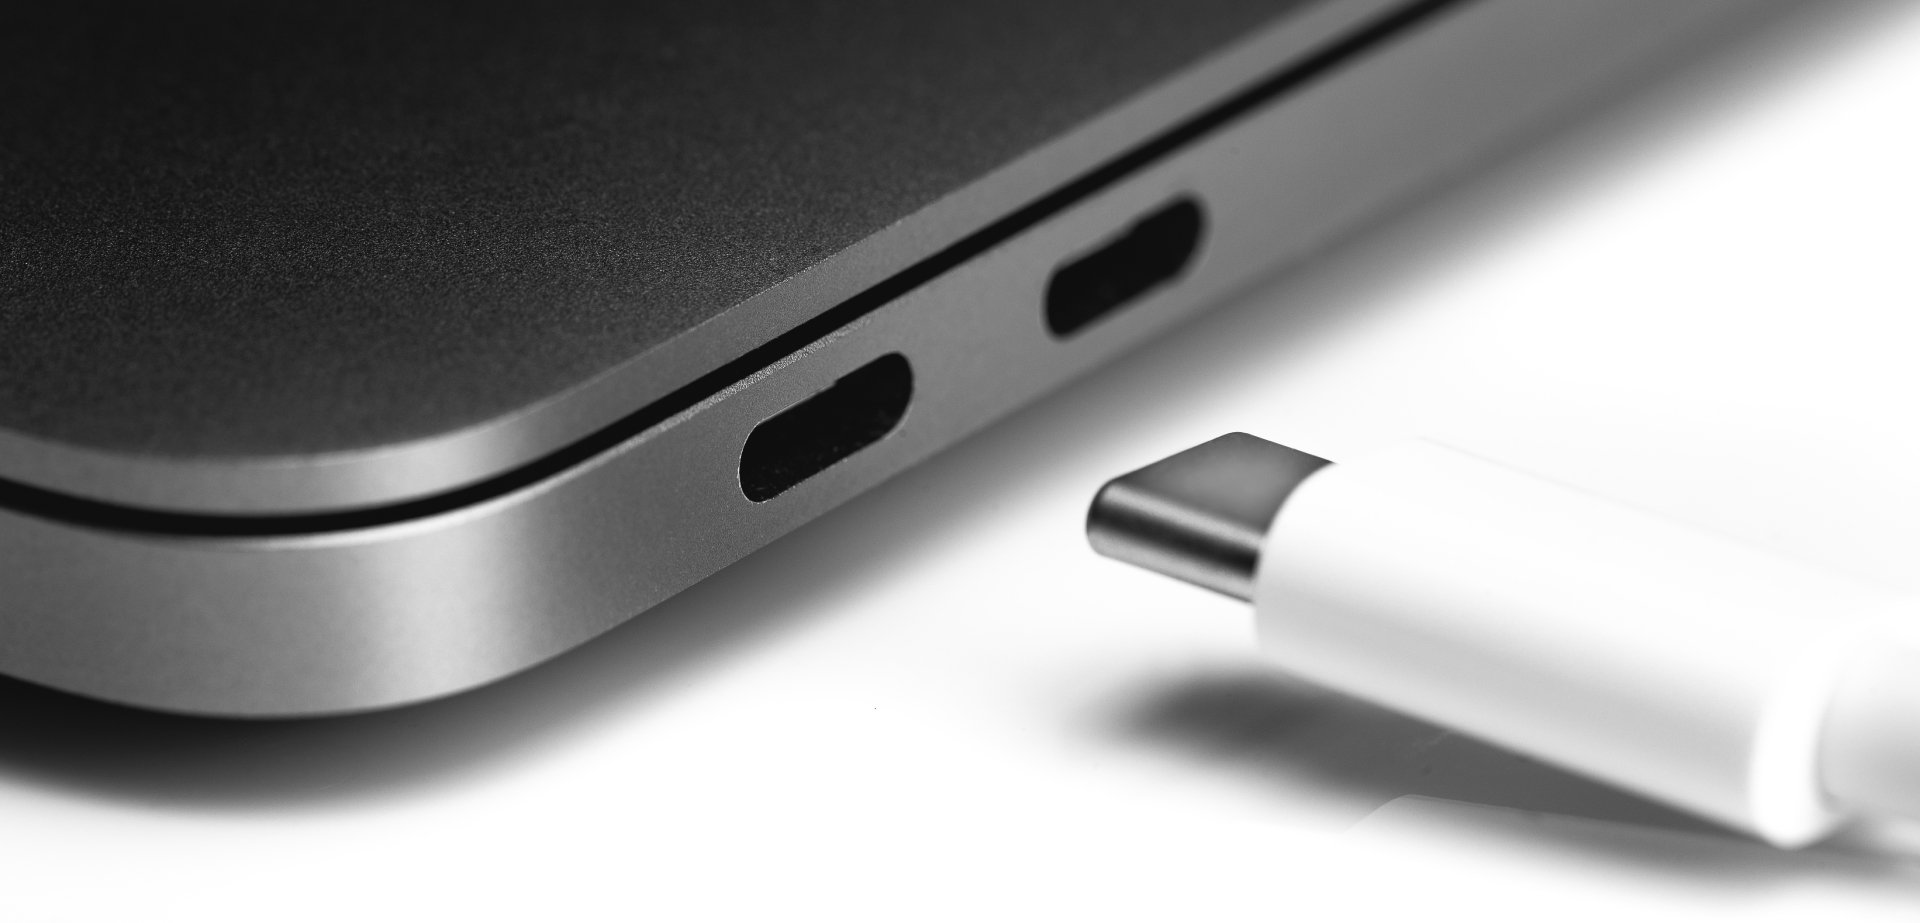 USB-C with universal and user-friendly feature, making it being included with almost every device available